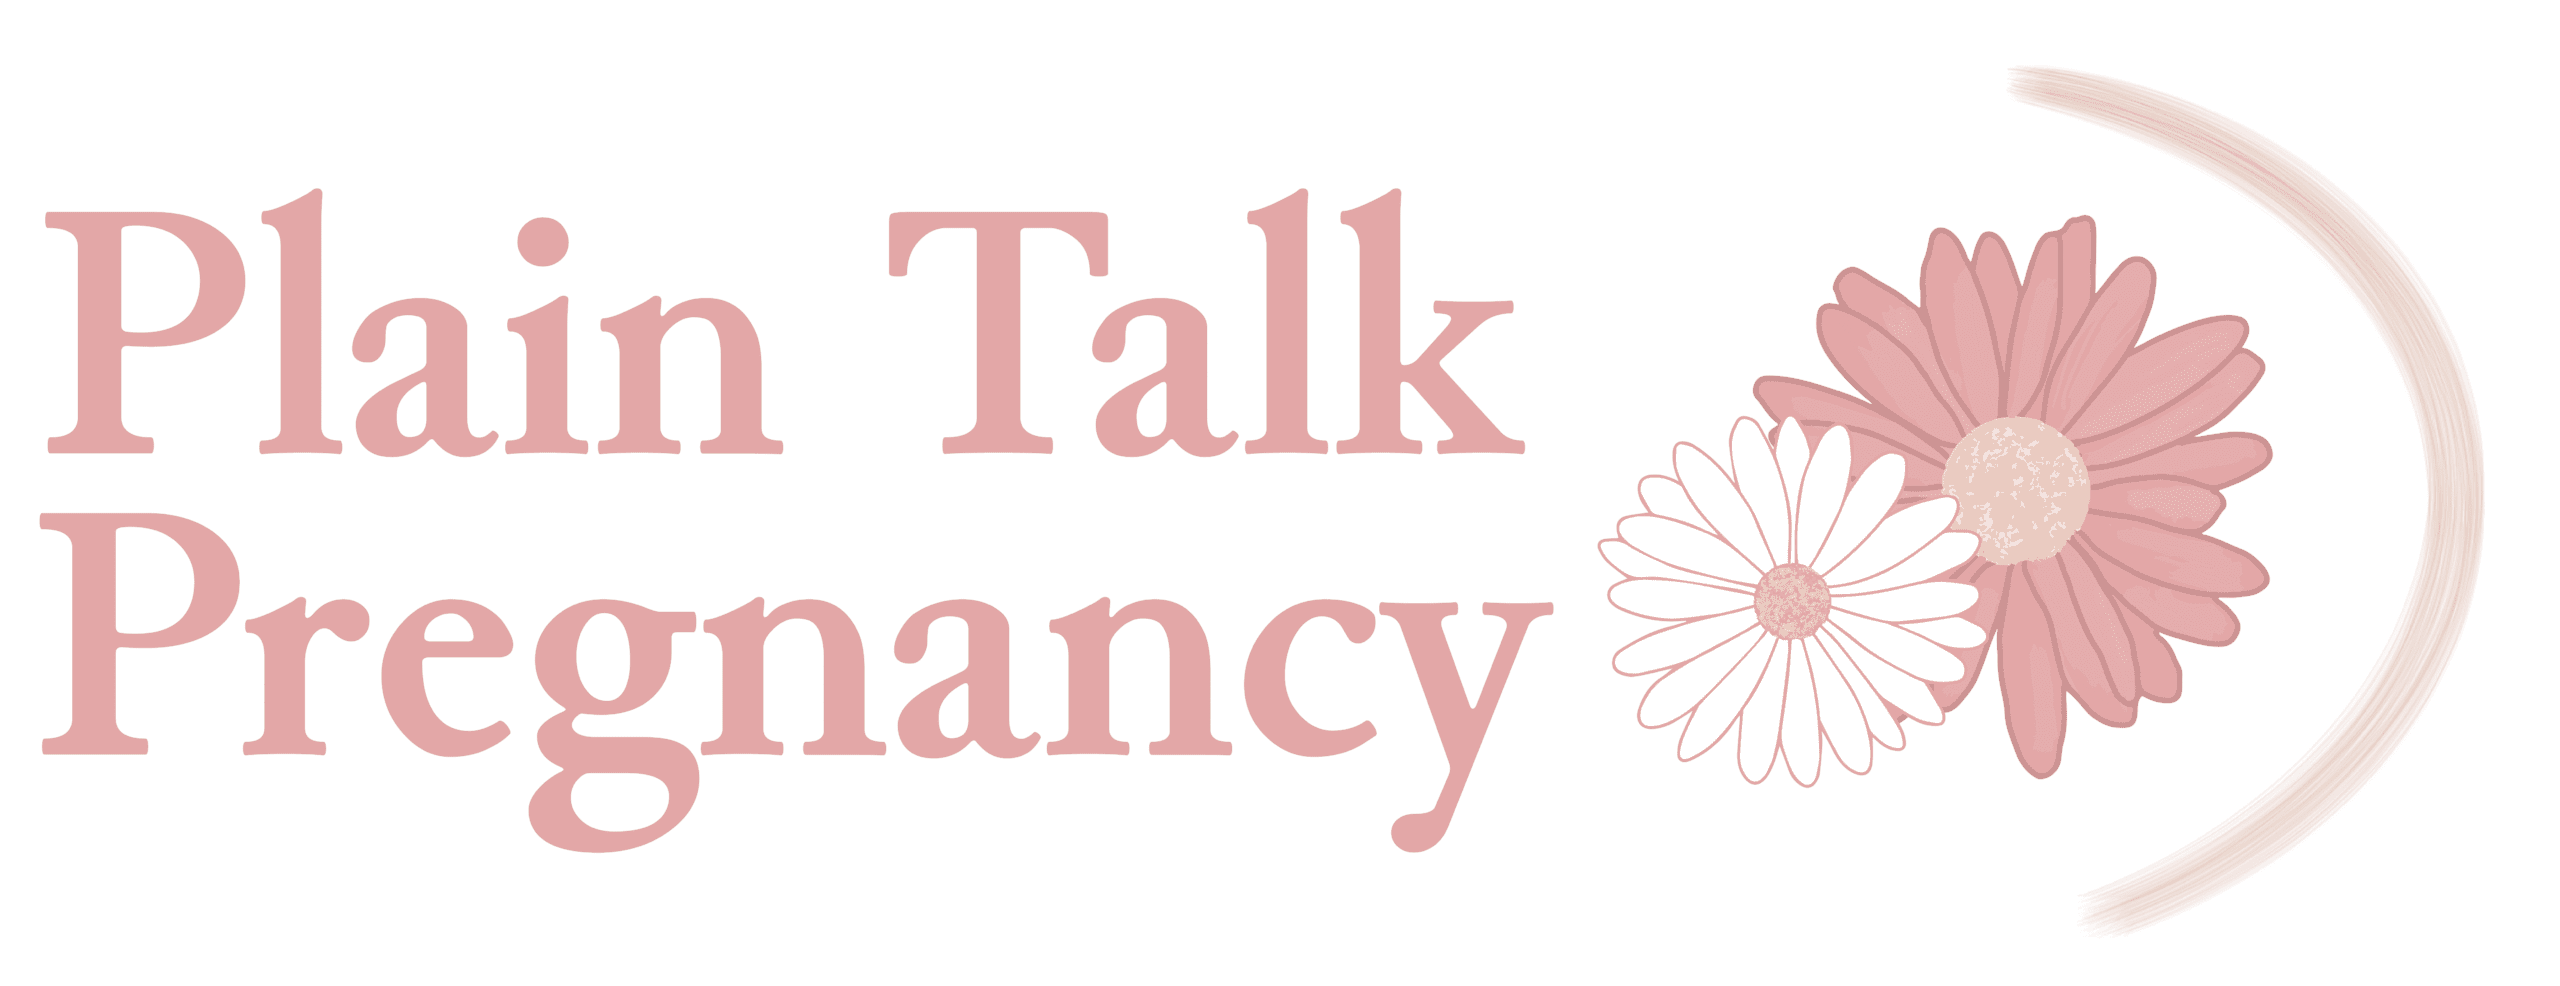 Plain Talk Pregnancy Logo in medium pink with two daisies